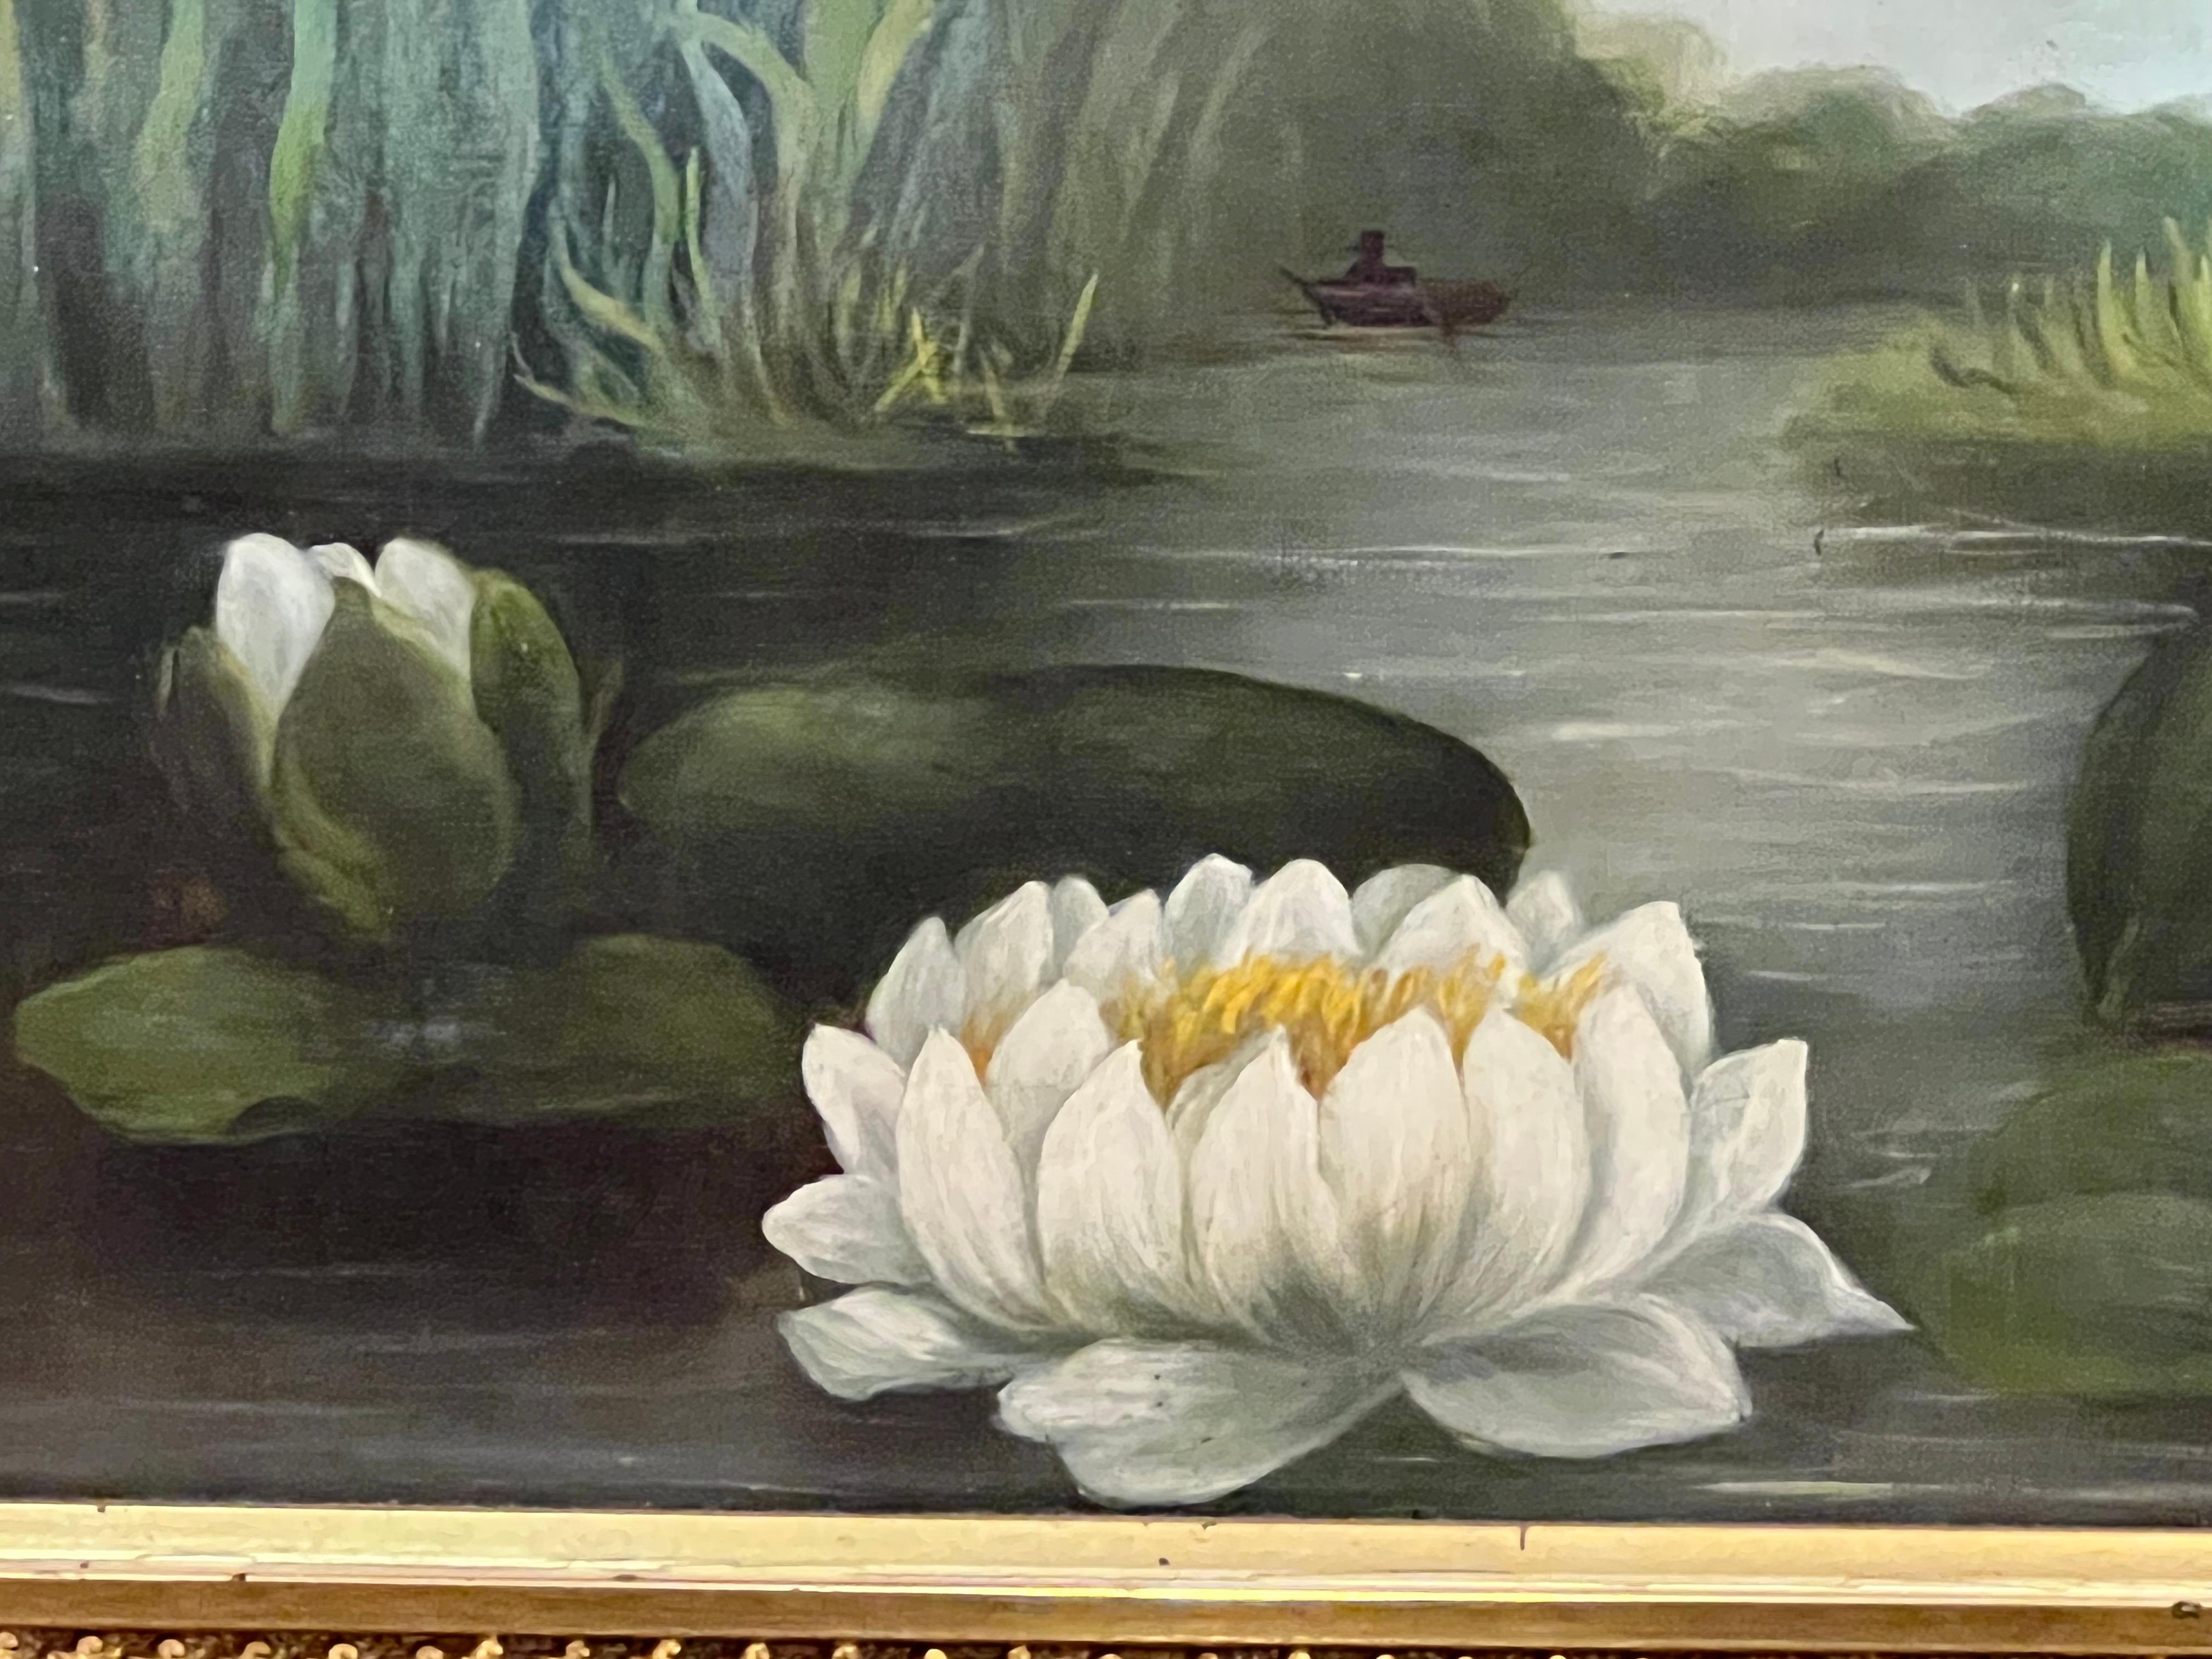 This striking oil painting seems to take on the depth, serene colors, and reflection of the pure white, spiritual lotus flowers. Floating on a reflective water surface, the artist captured the light bouncing off the water and leaves breaking the